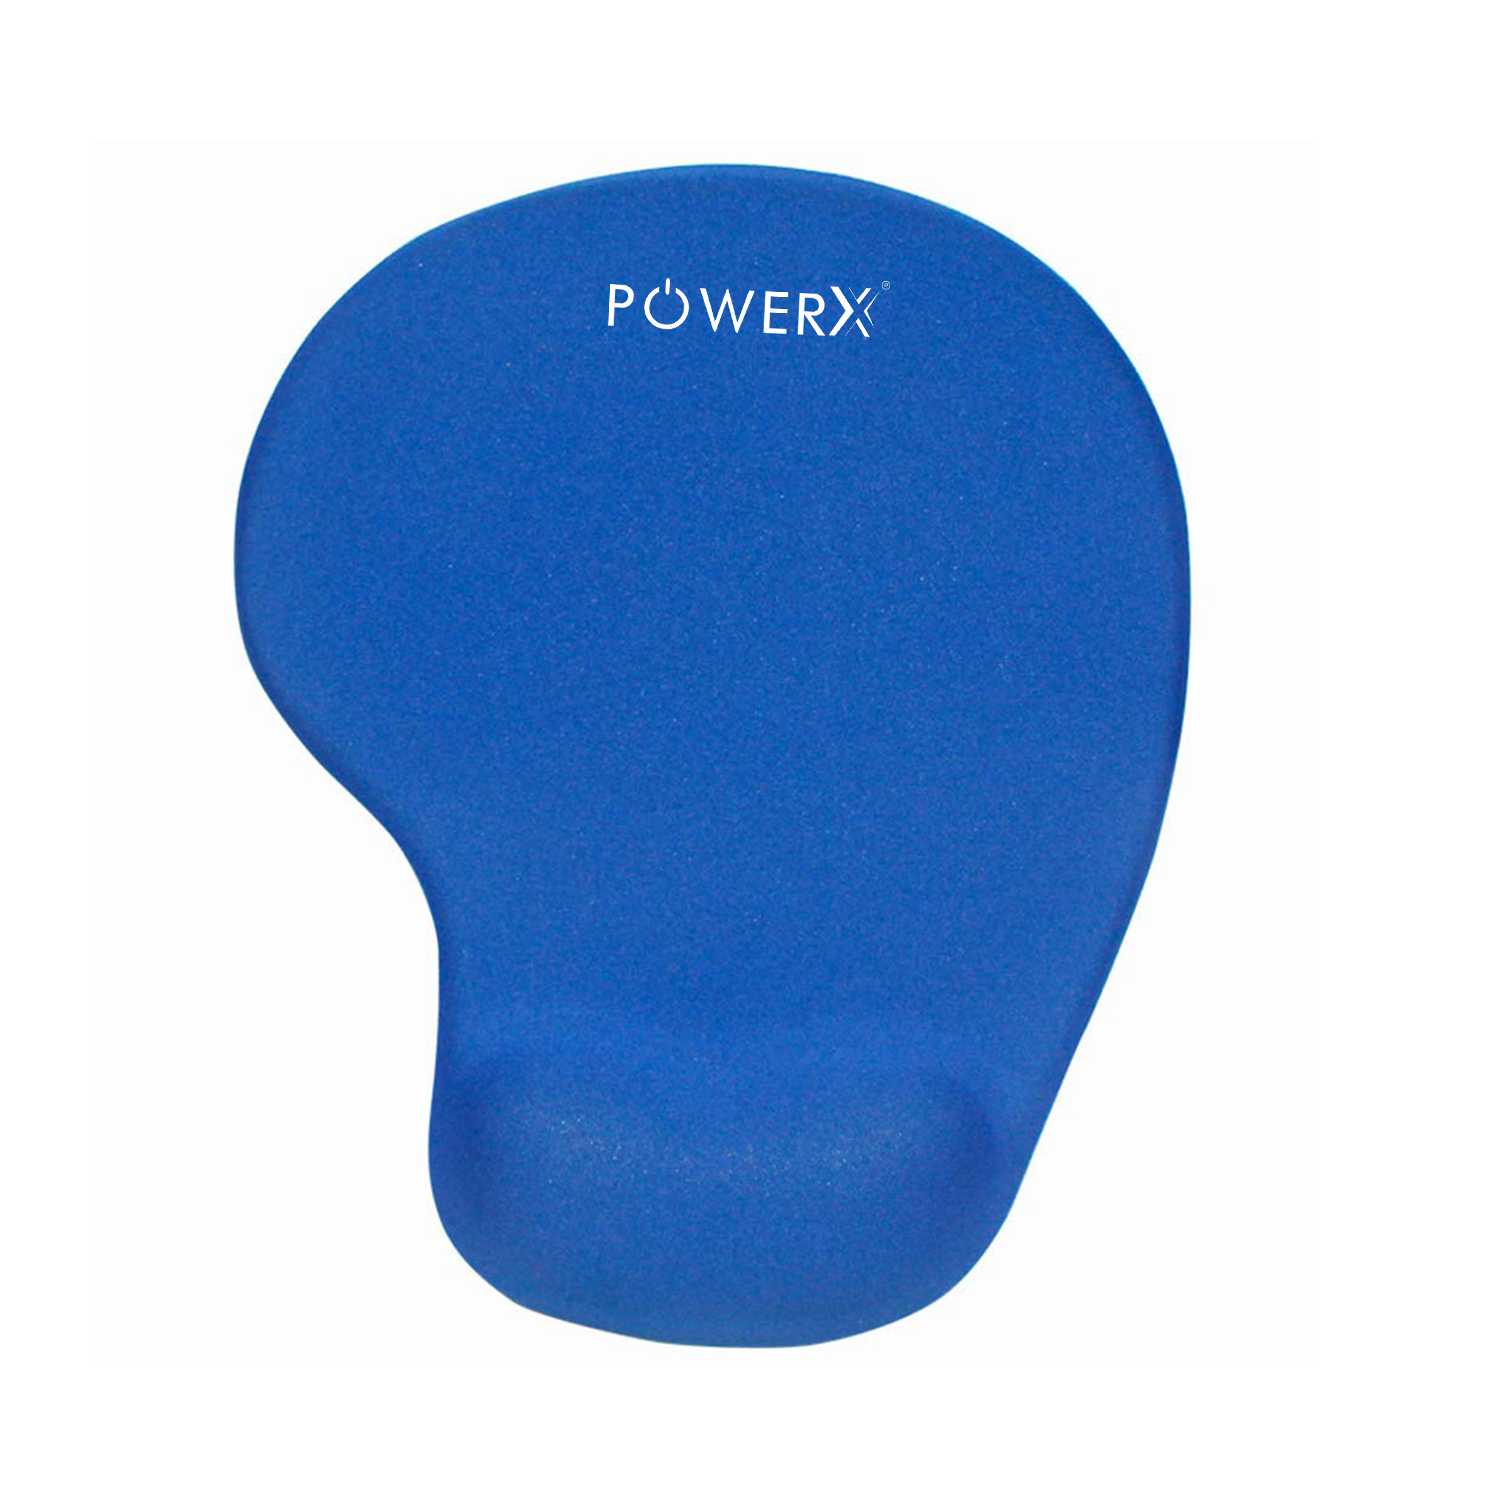 MOUSE PAD WITH GELL